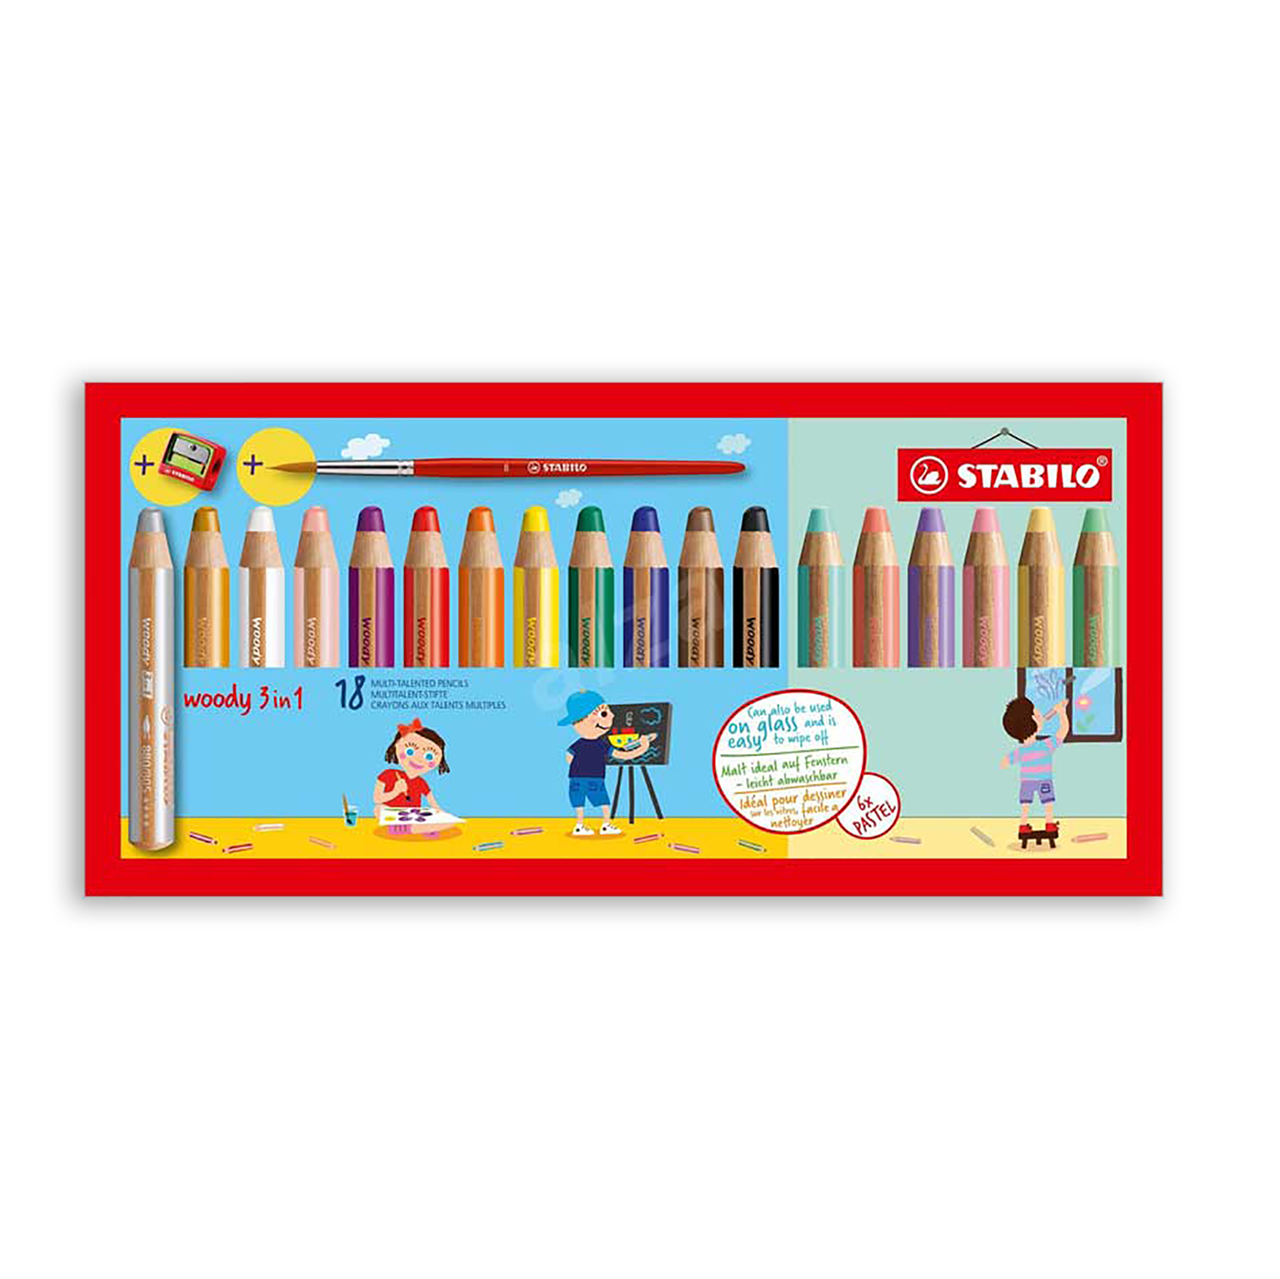 STABILO Woody 3 in 1 Multi Talent Pencil Crayon - White (Pack of 5)